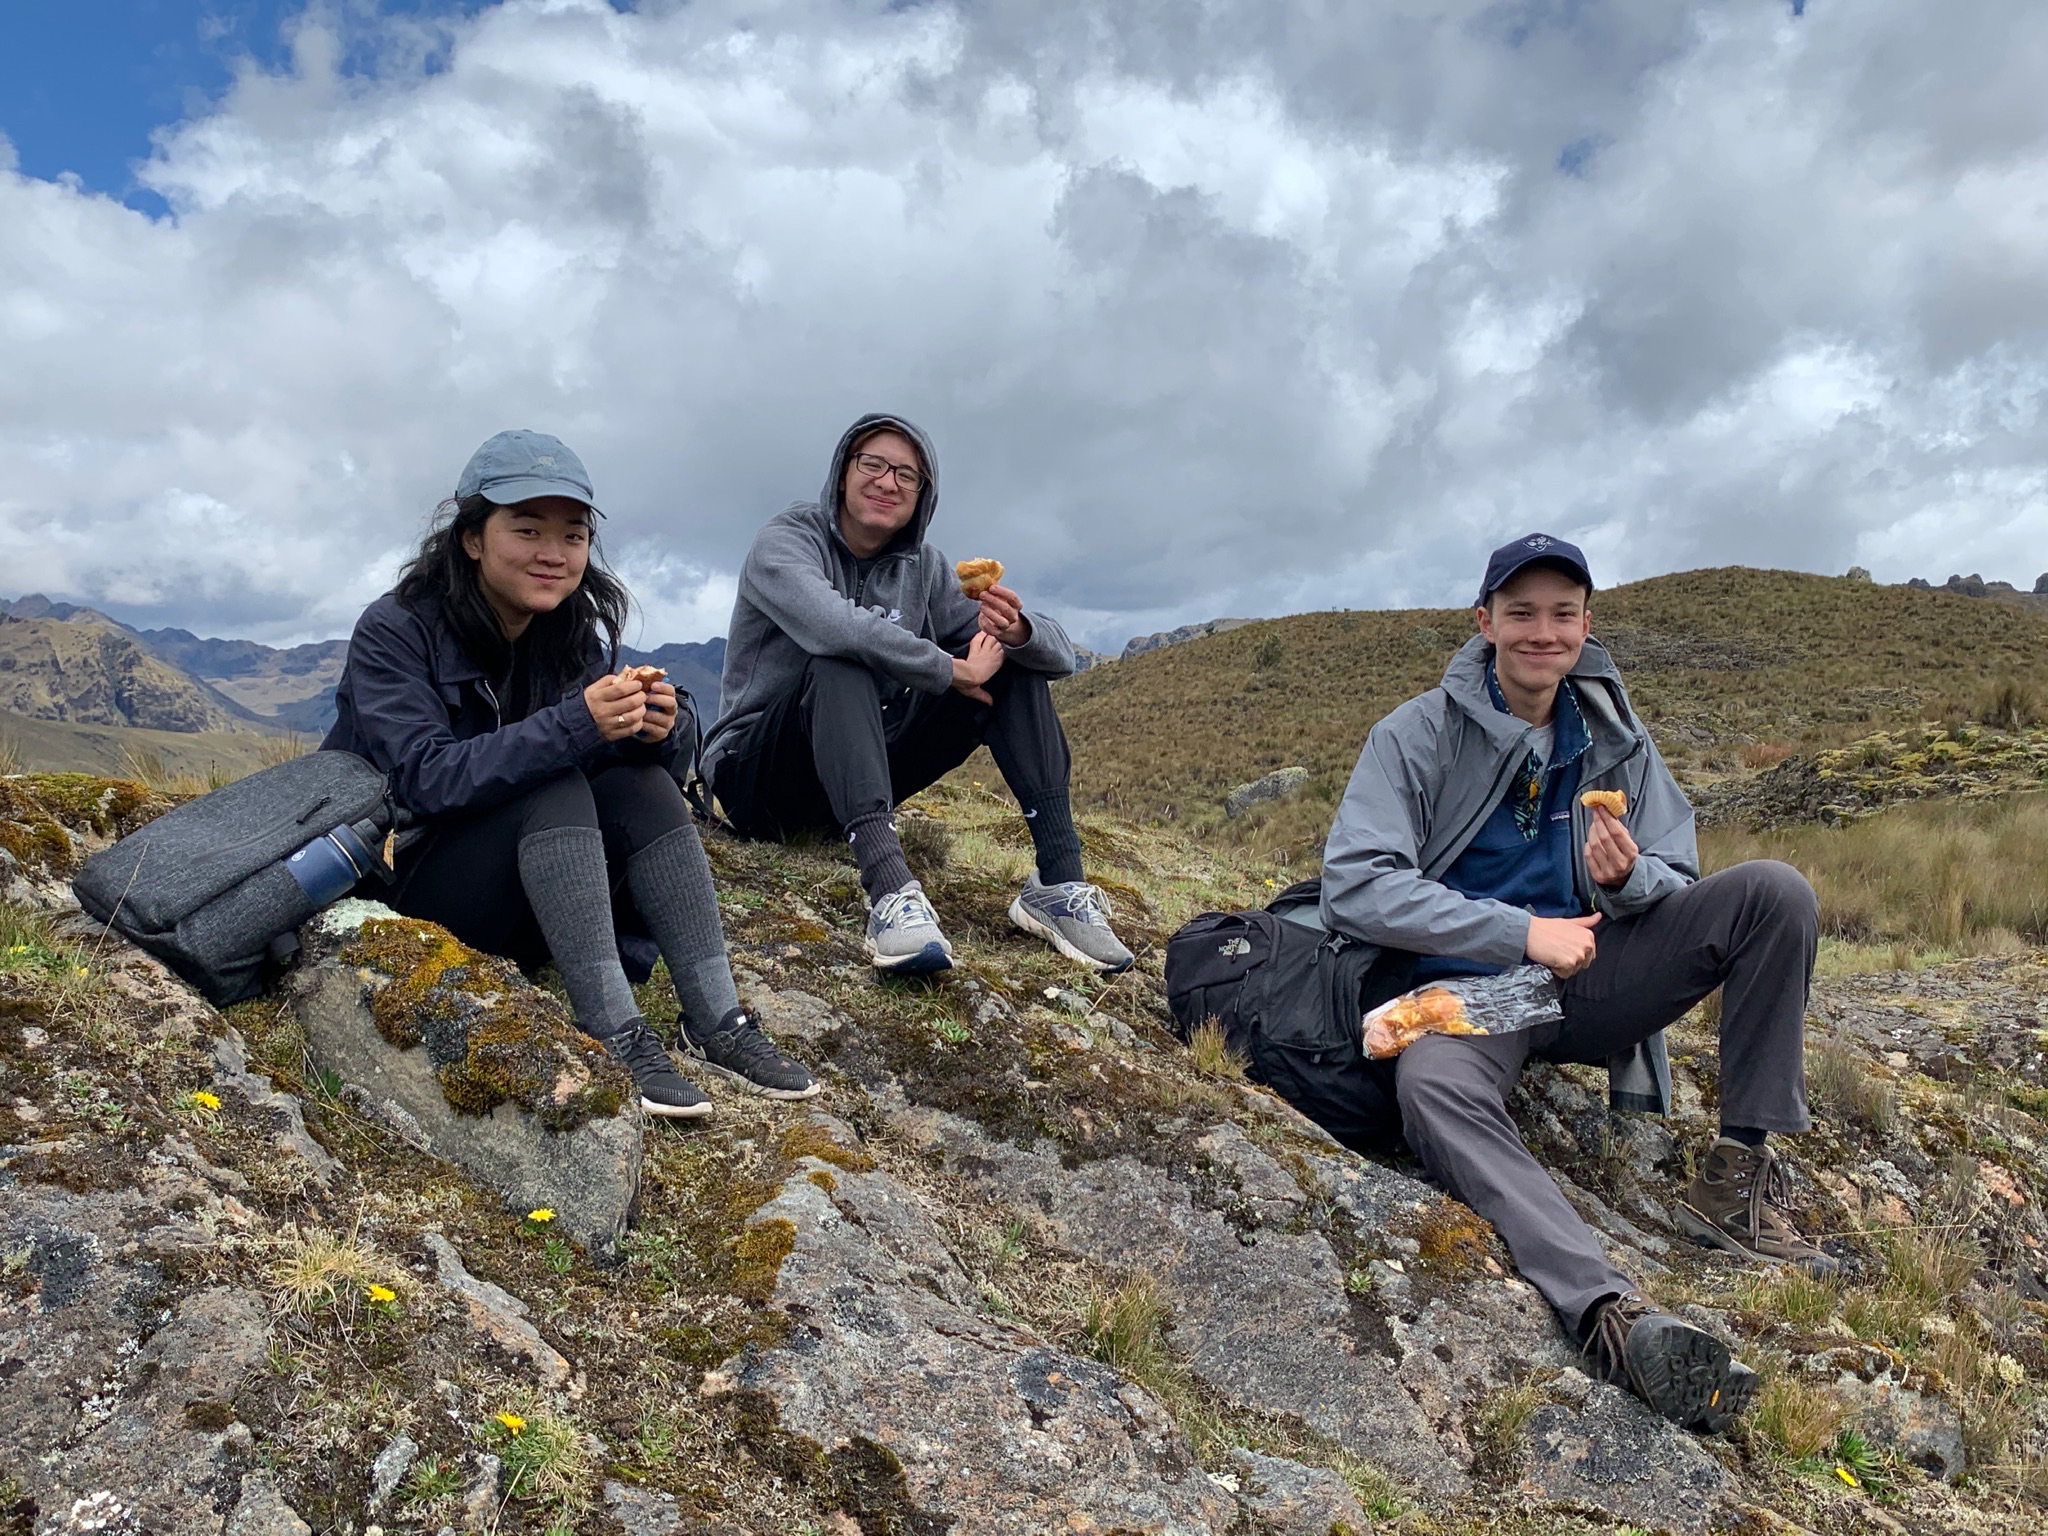 3 teens on AMIGOS trip sit on a mountain eating a snack